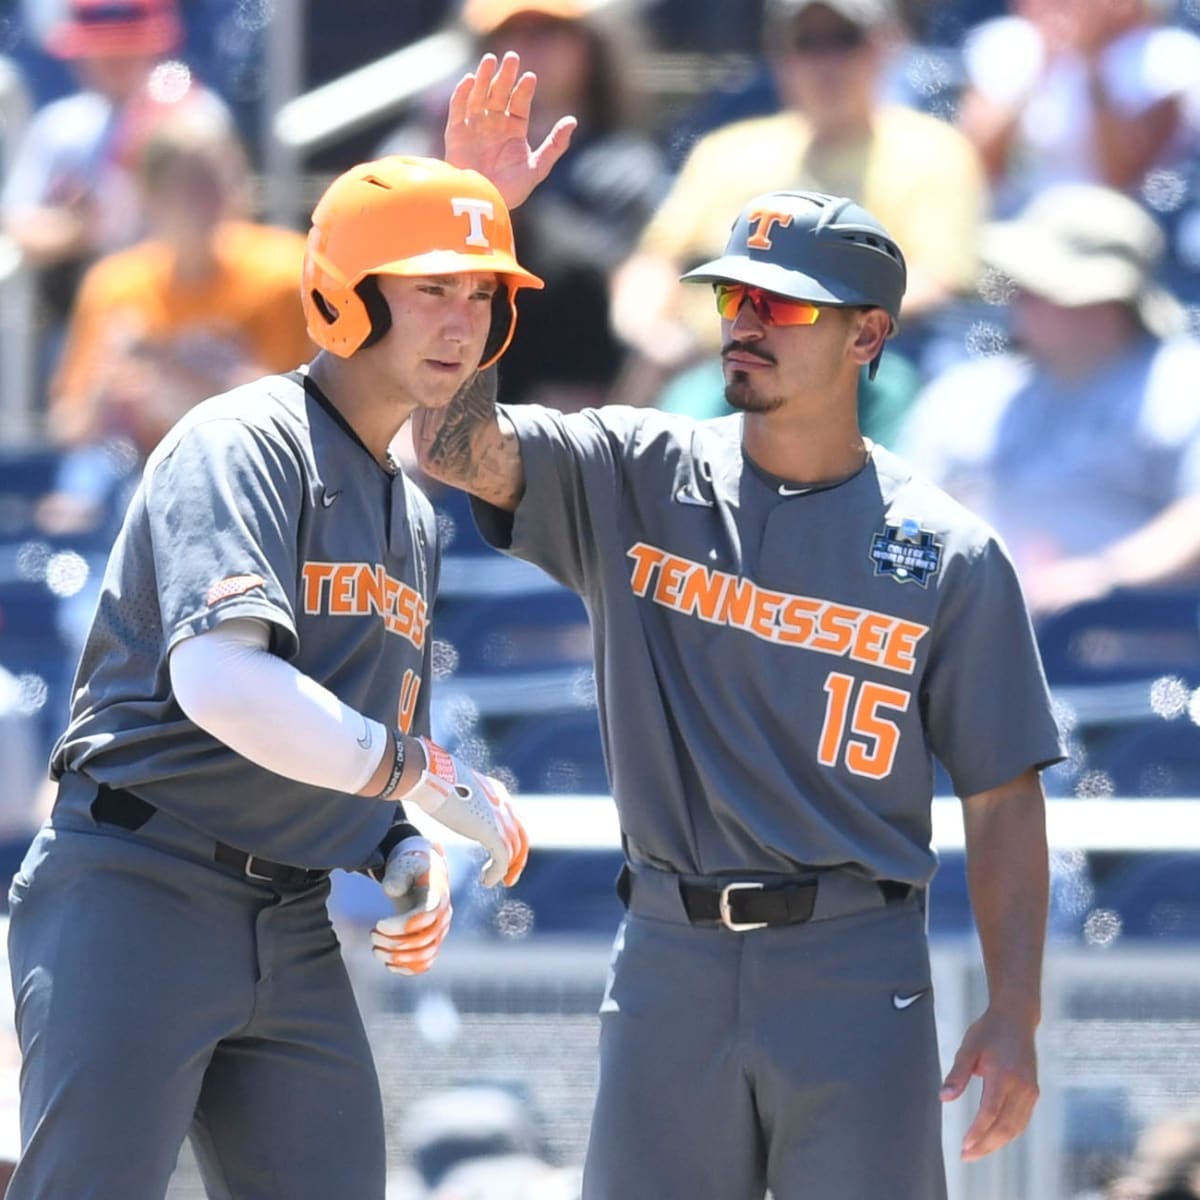 Vols baseball star hints at his future in Knoxville - A to Z Sports